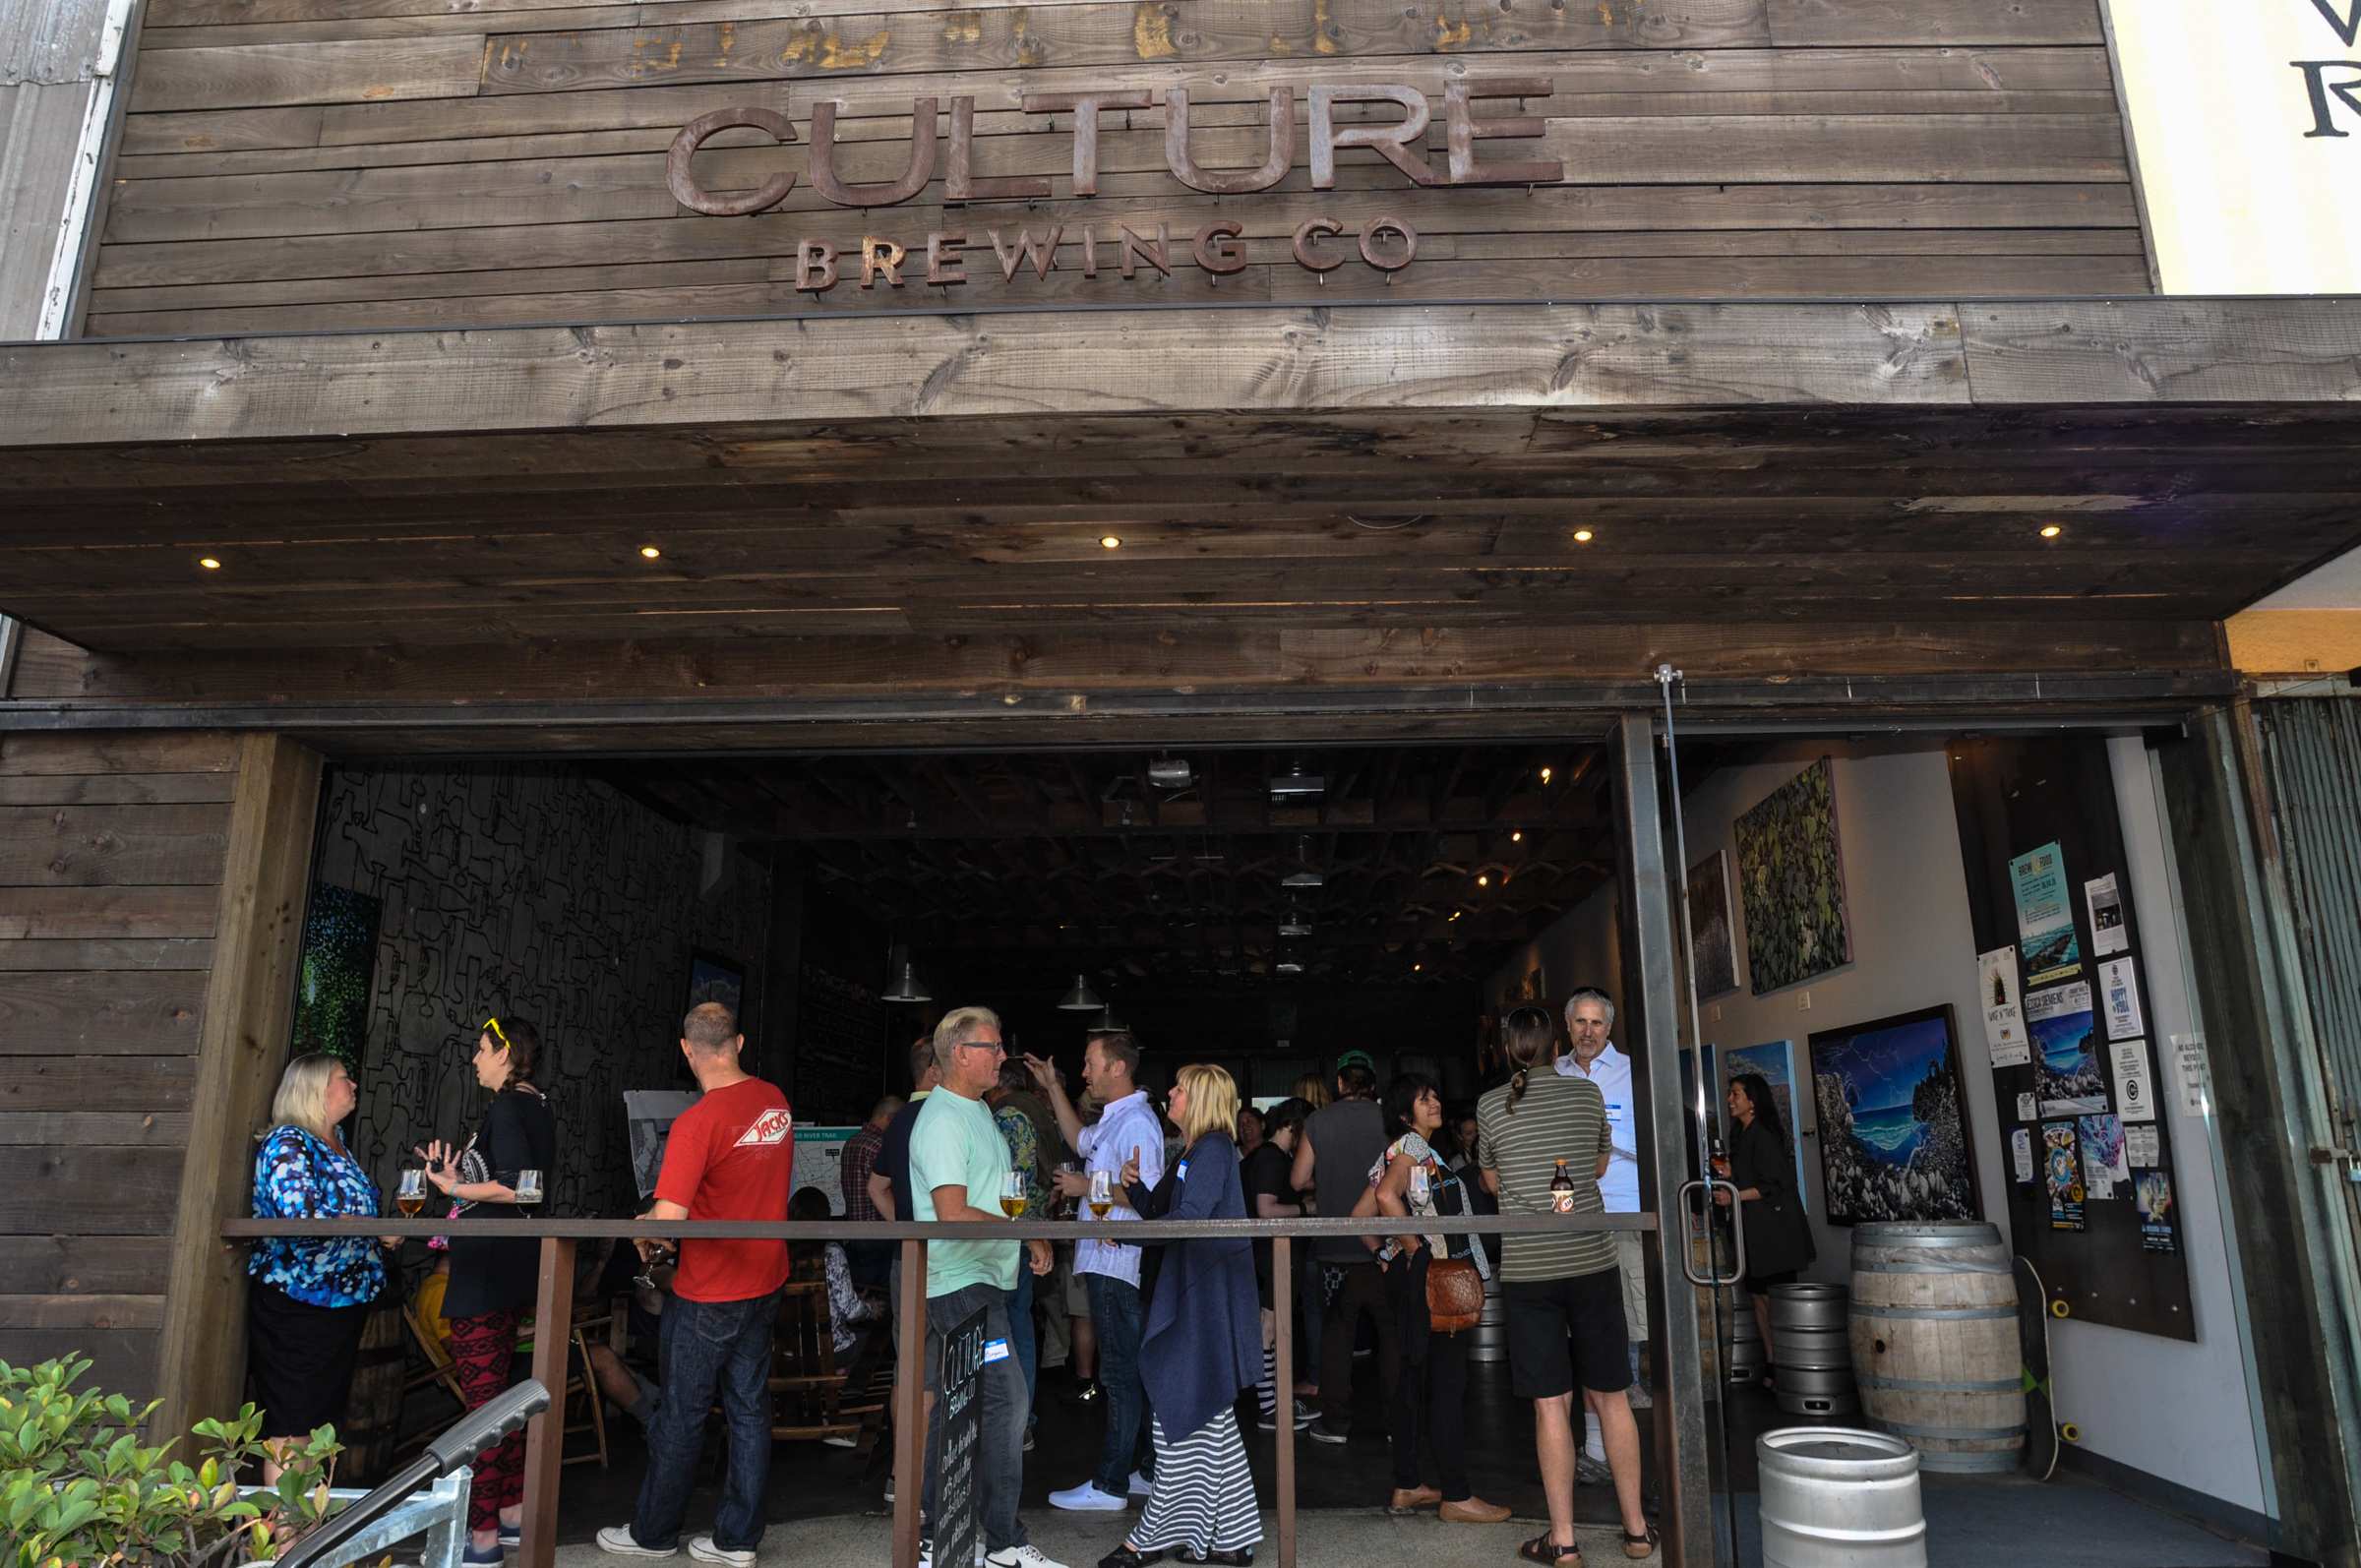 Photo of: OBMA Member Event: Sundowner at Culture Brewing Co with The Joint